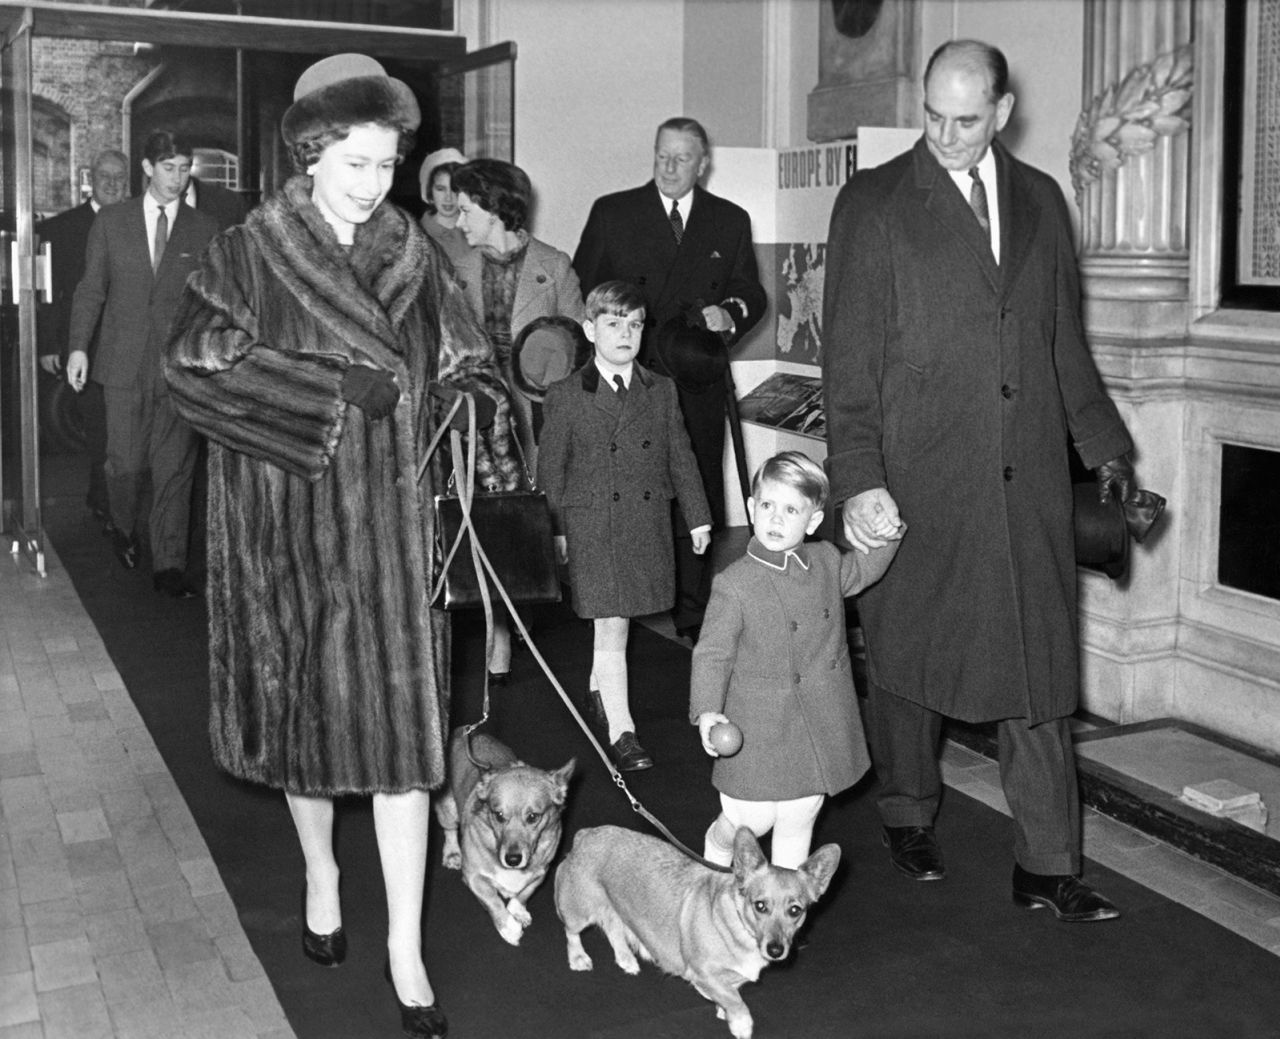 The Queen leads her corgis into Liverpool Street Station in London in 1966.